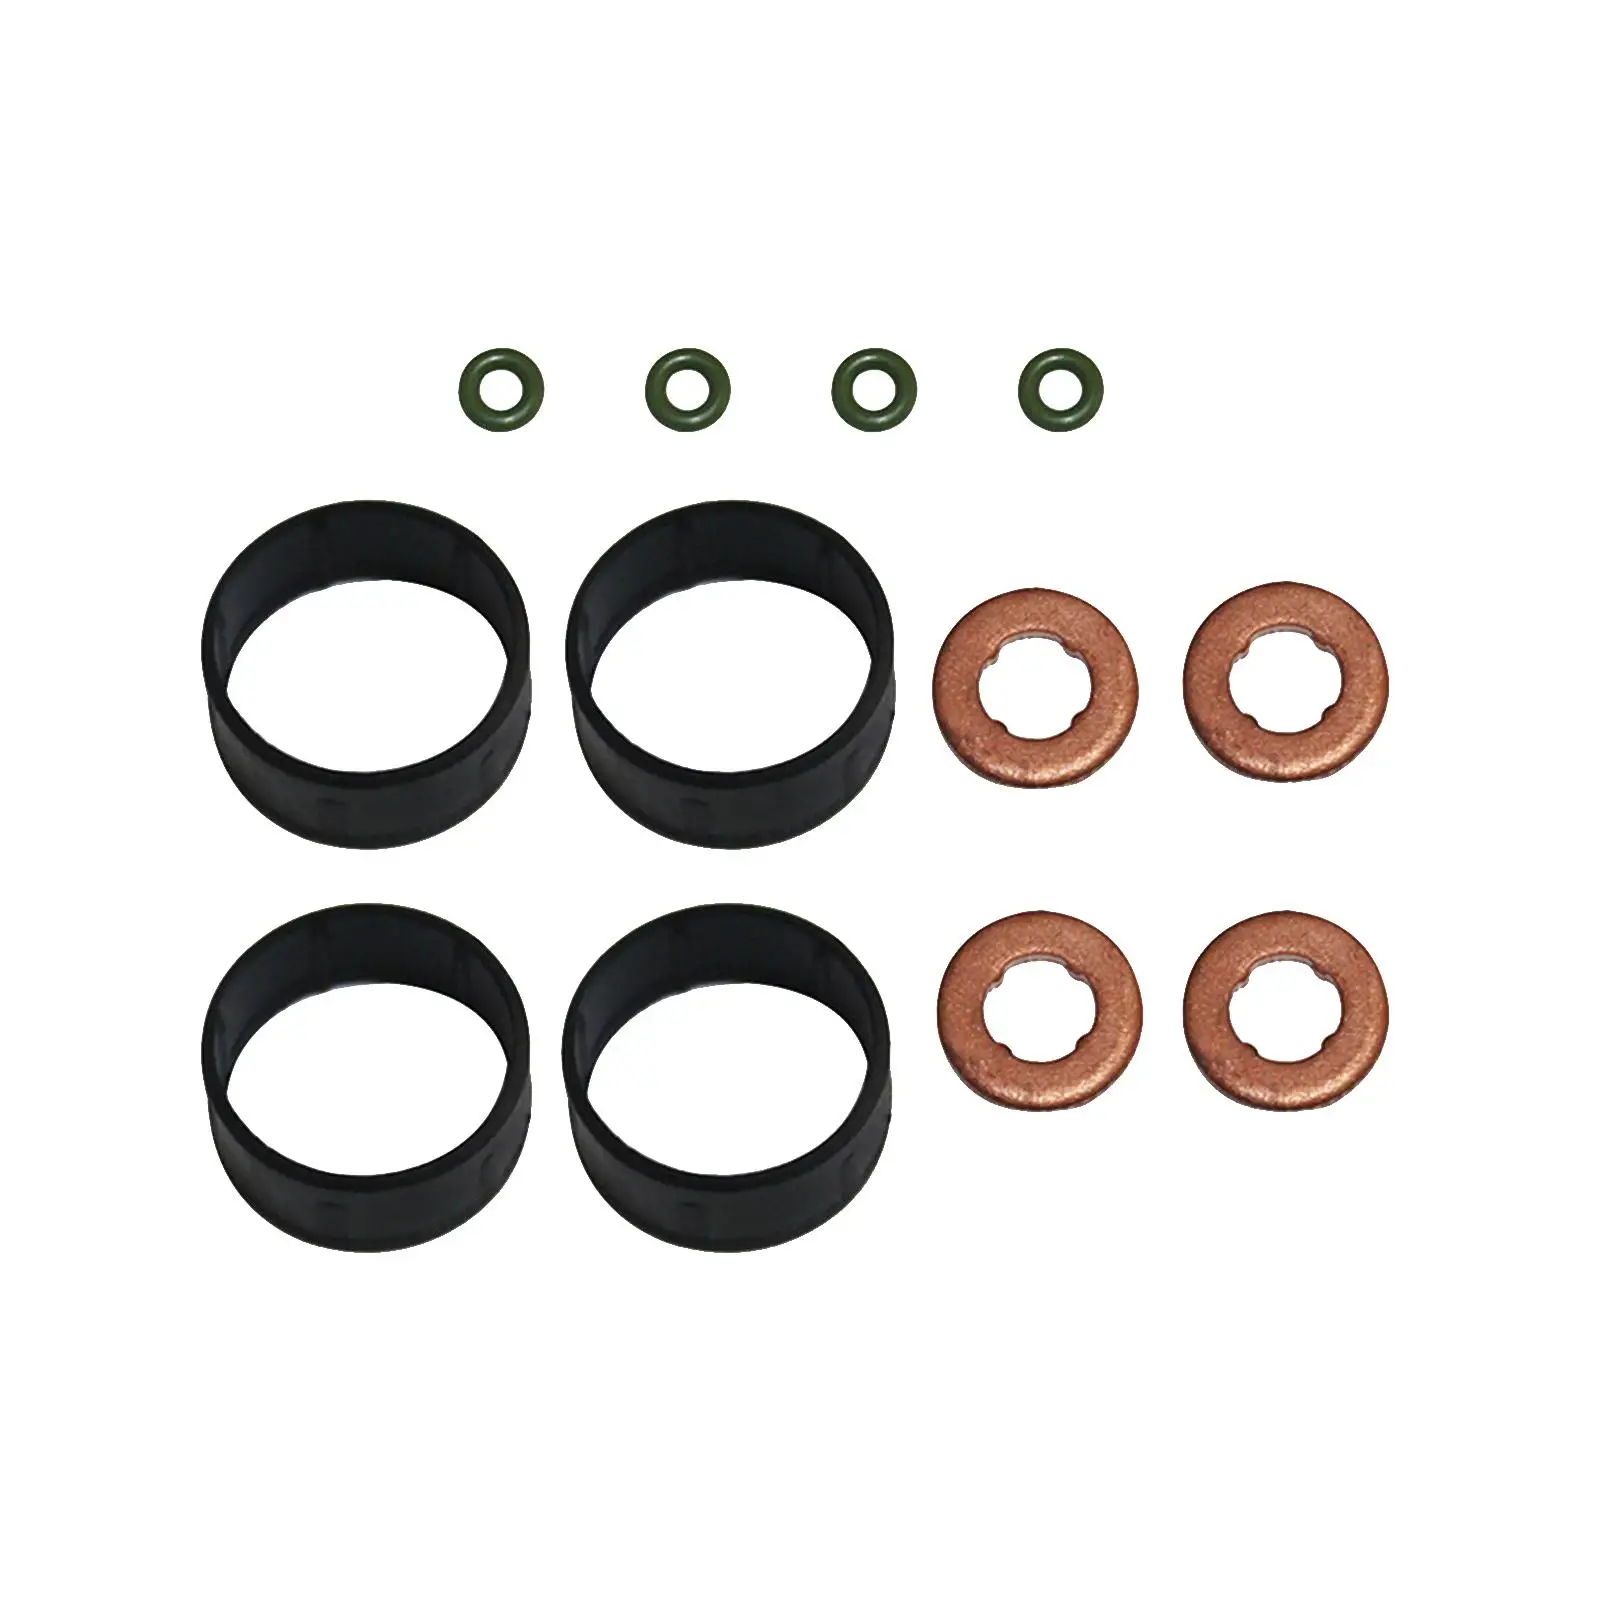 Fuel Injector Seal Washer O-ring Set 1204698 High Quality Replace Parts Durable